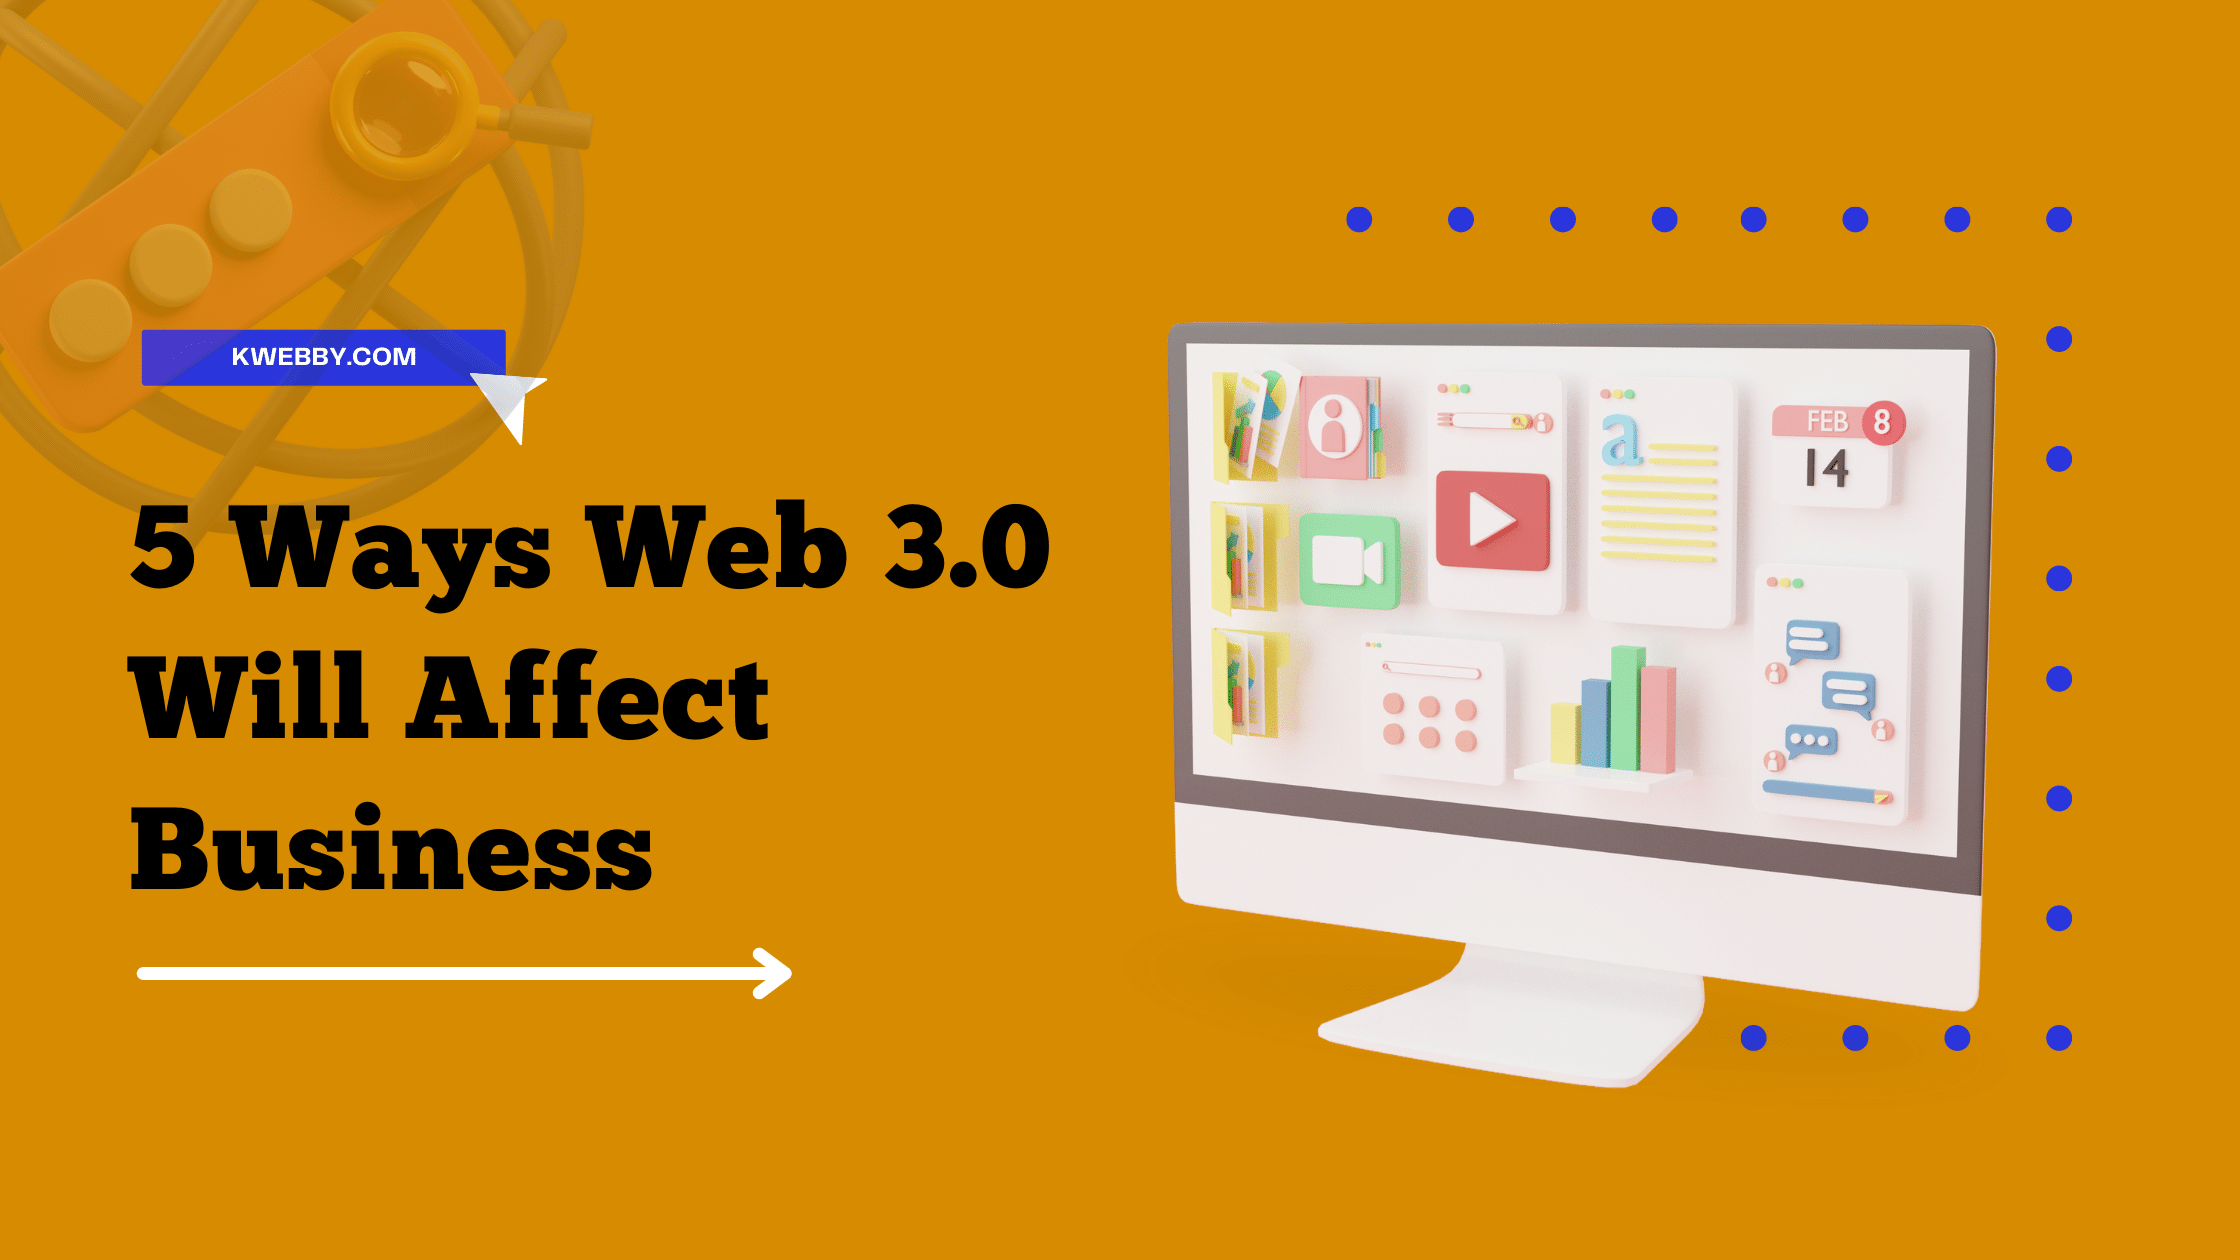 5 Ways Web 3.0 Will Affect Business